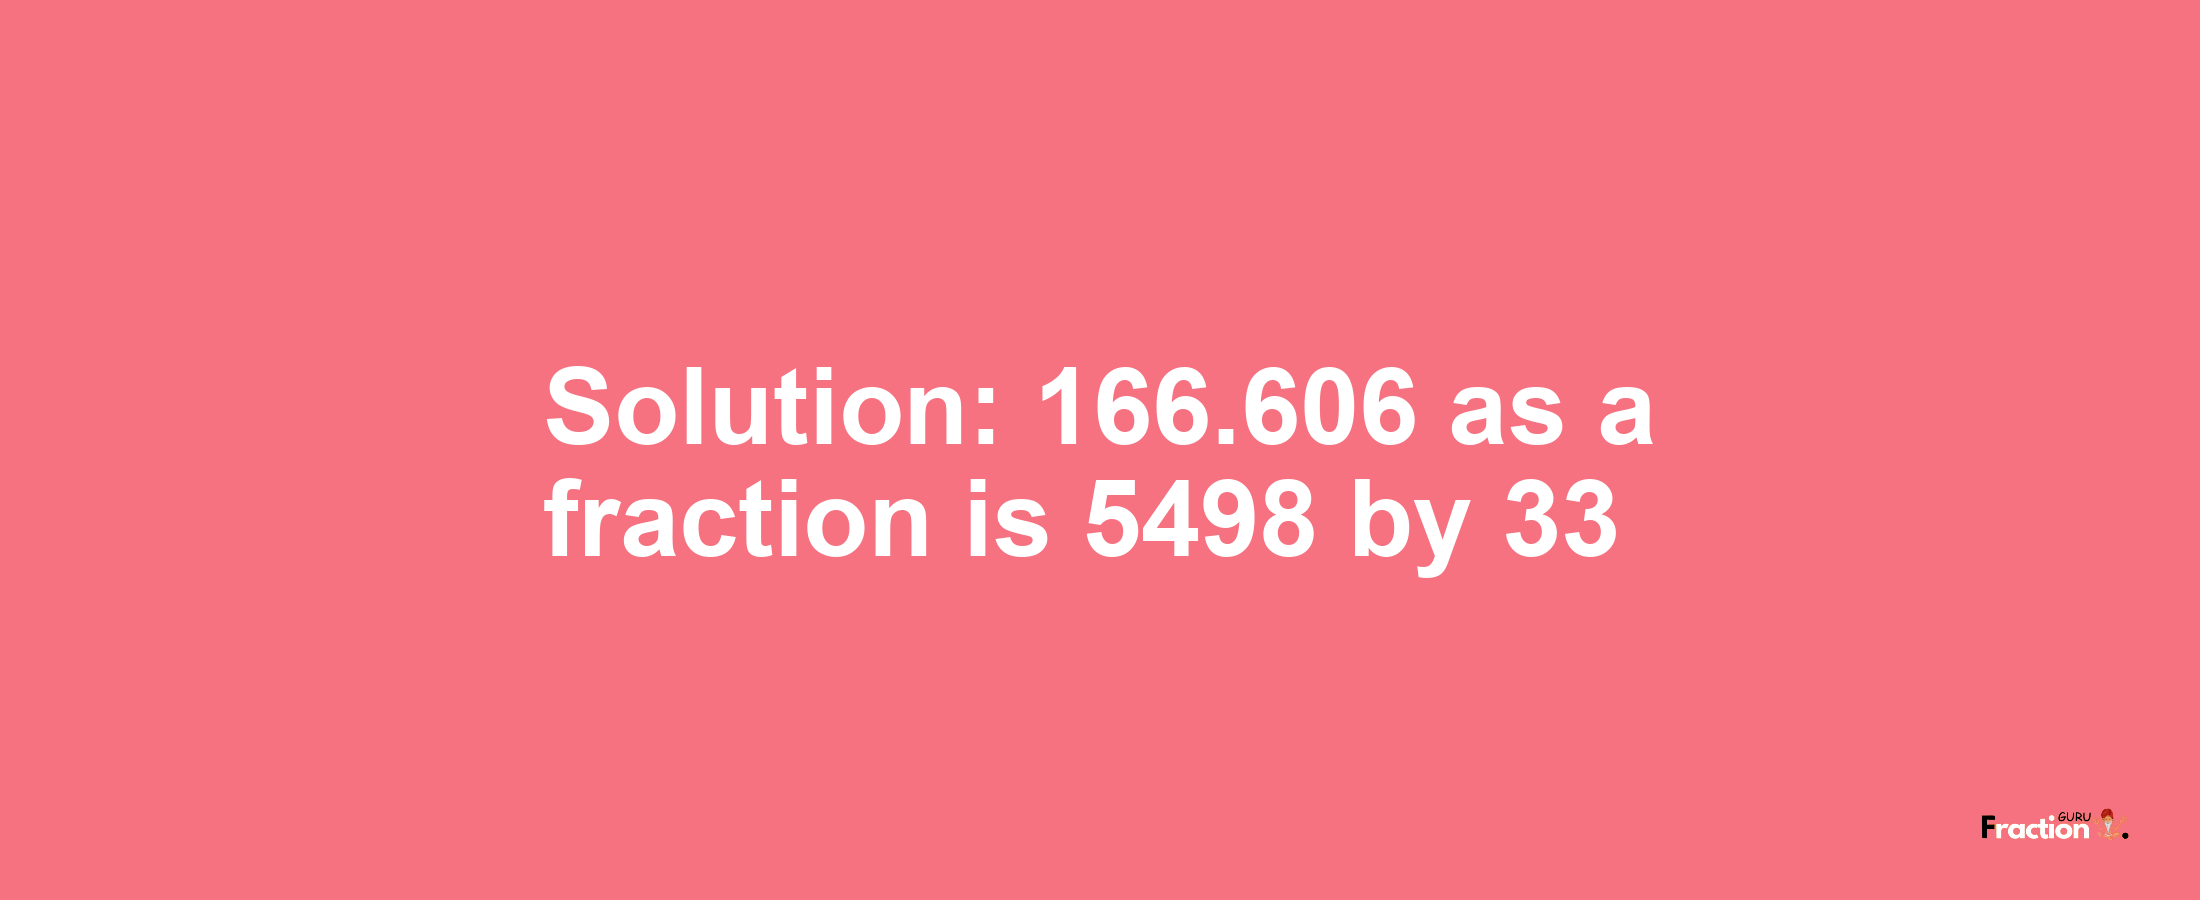 Solution:166.606 as a fraction is 5498/33